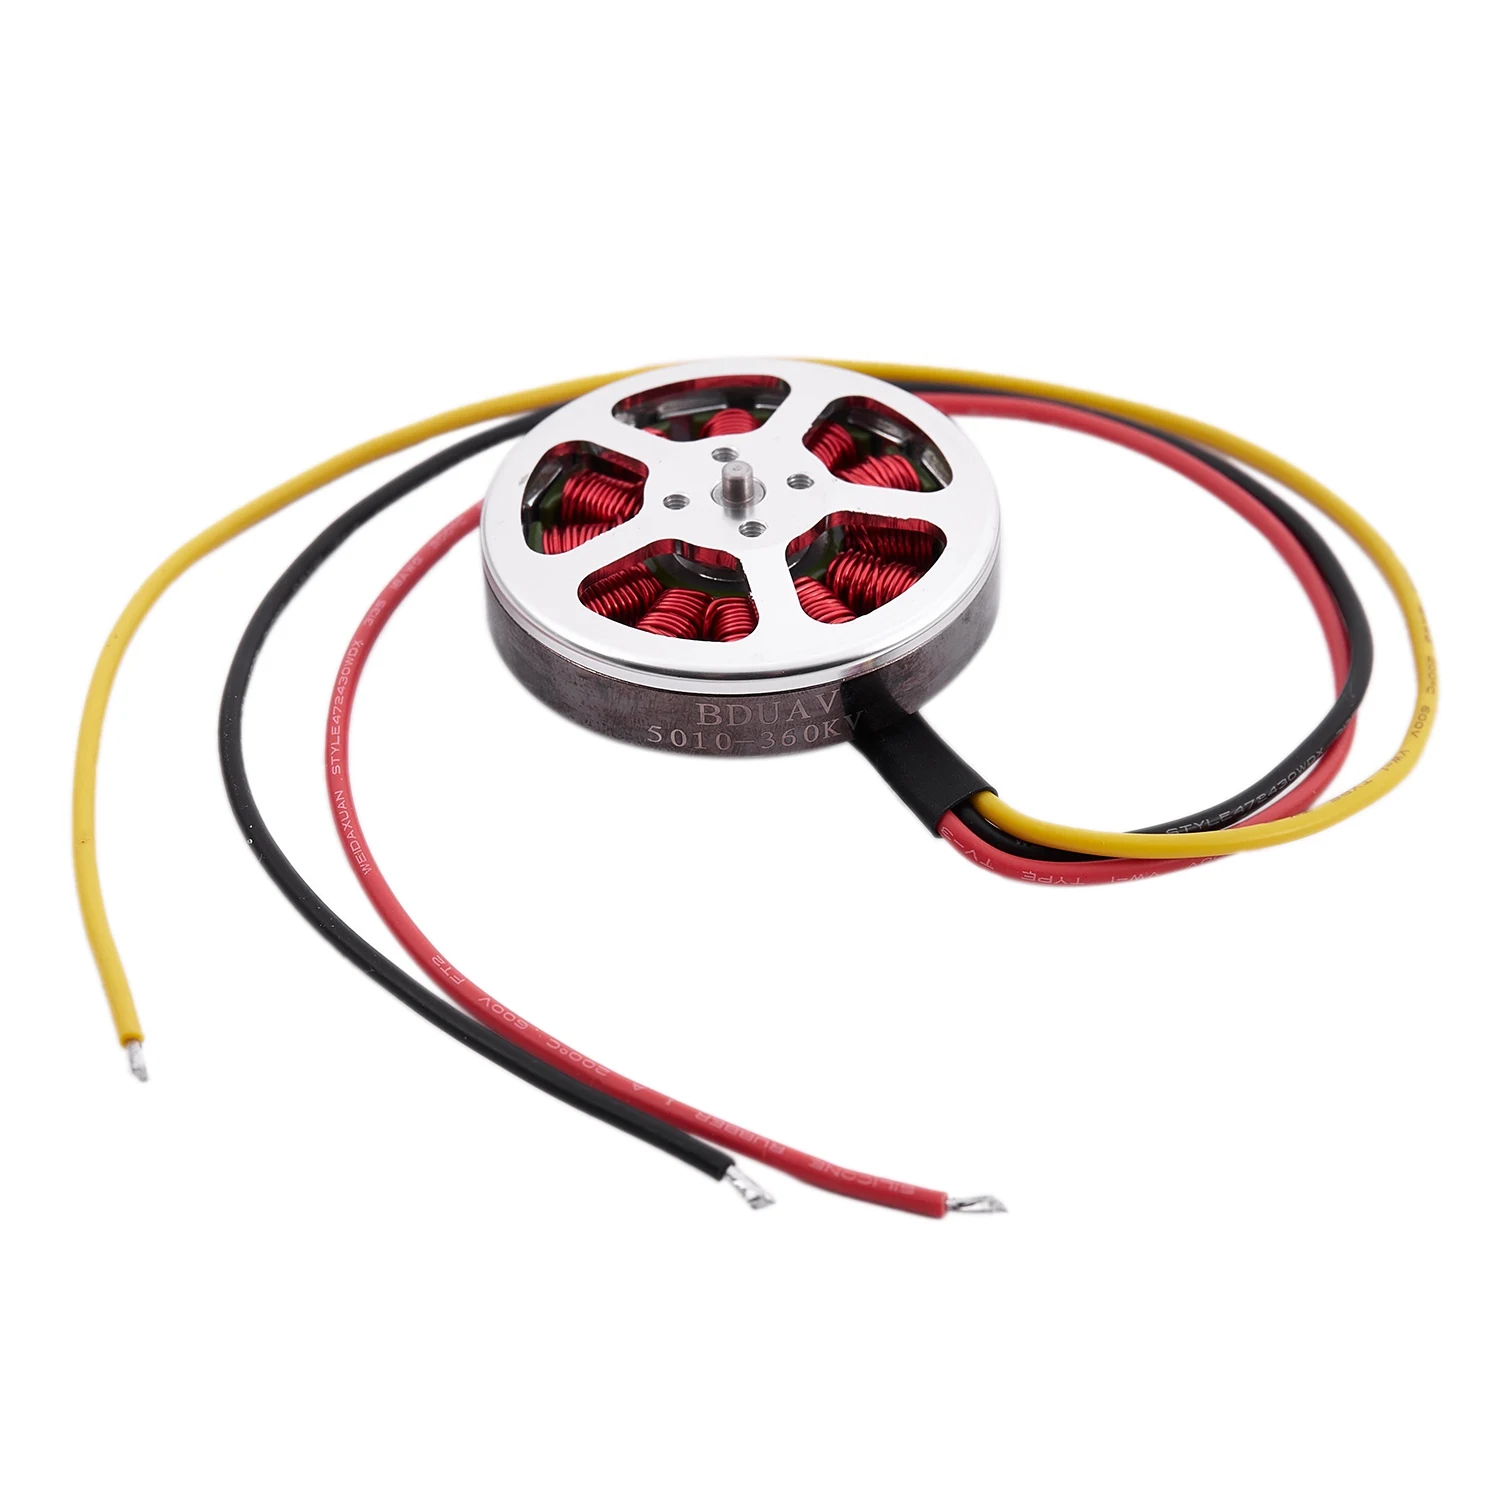 

5010 360Kv High Torque Brushless Motors for MultiCopter QuadCopter Multi-Axis Aircraft